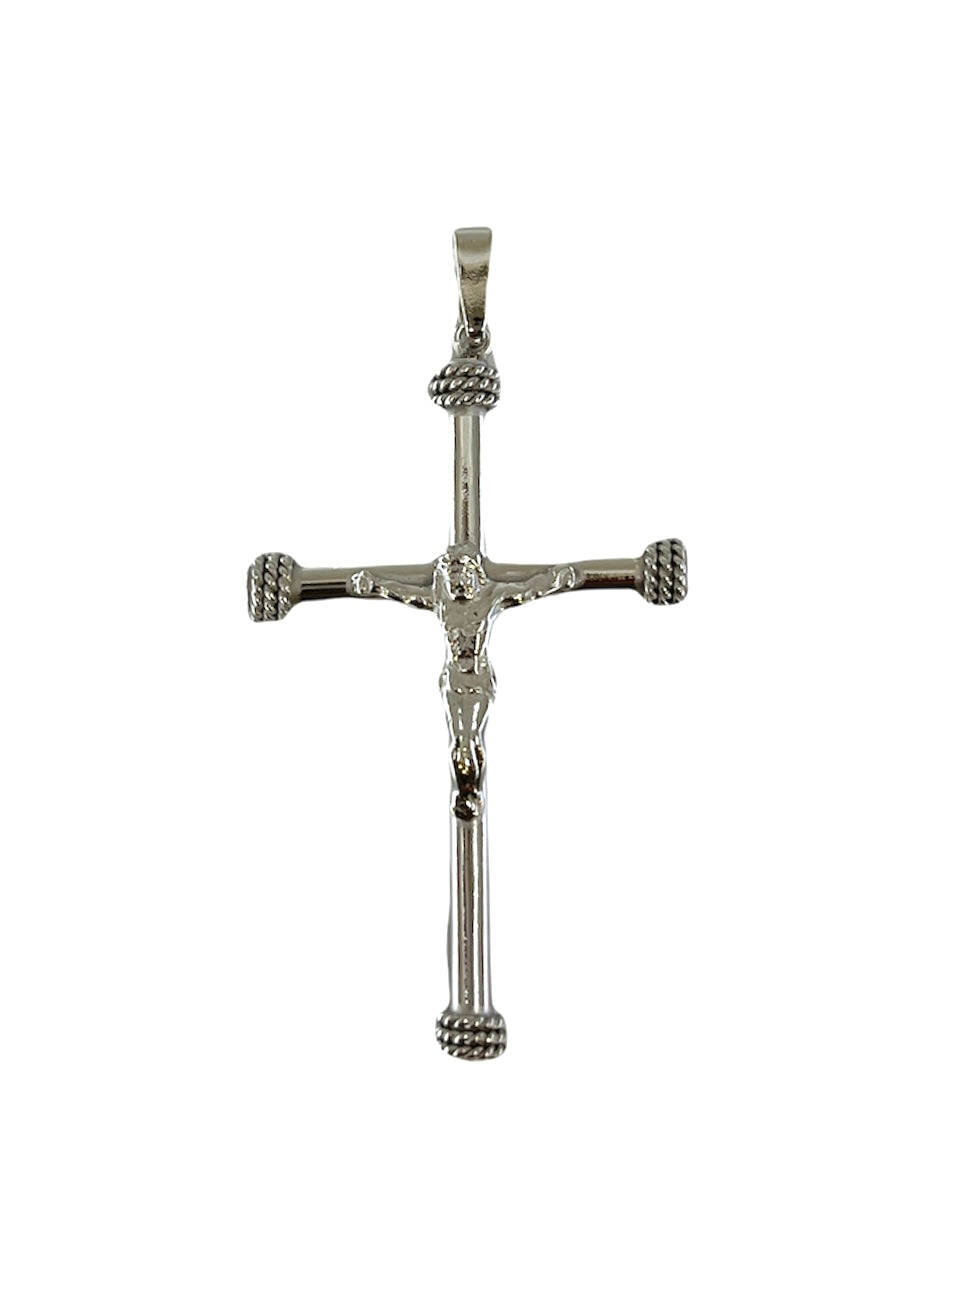 925 Sterling Silver Rhodium Plated Crucifix  with Rope Edges - 56mm x 30mm